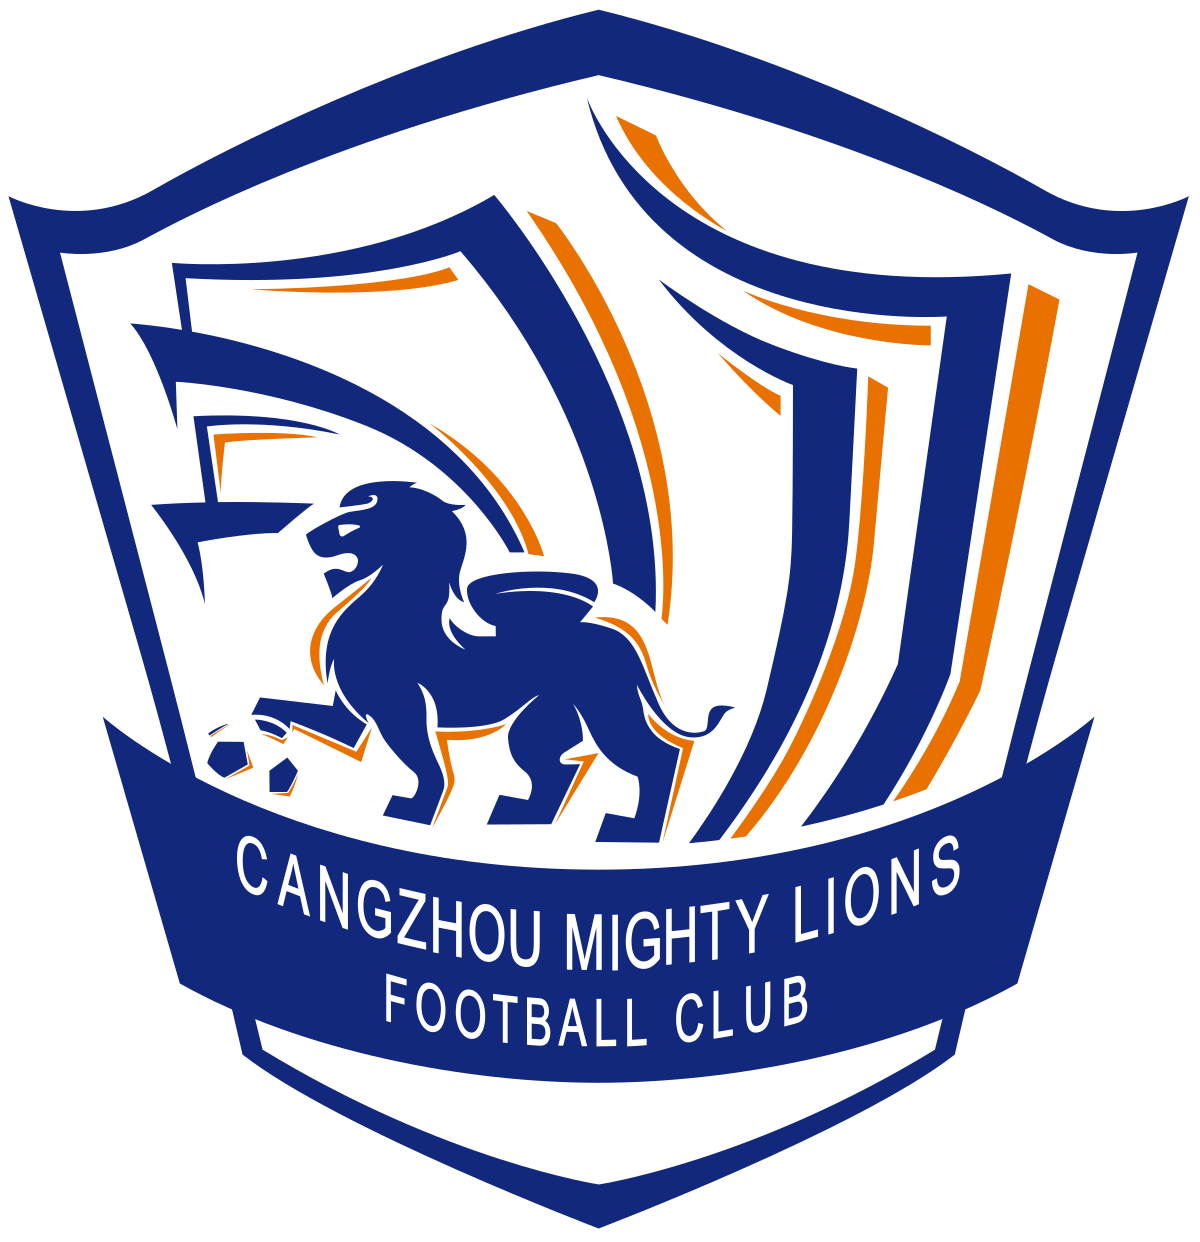 Wappen ehemals Cangzhou Mighty Lions FC